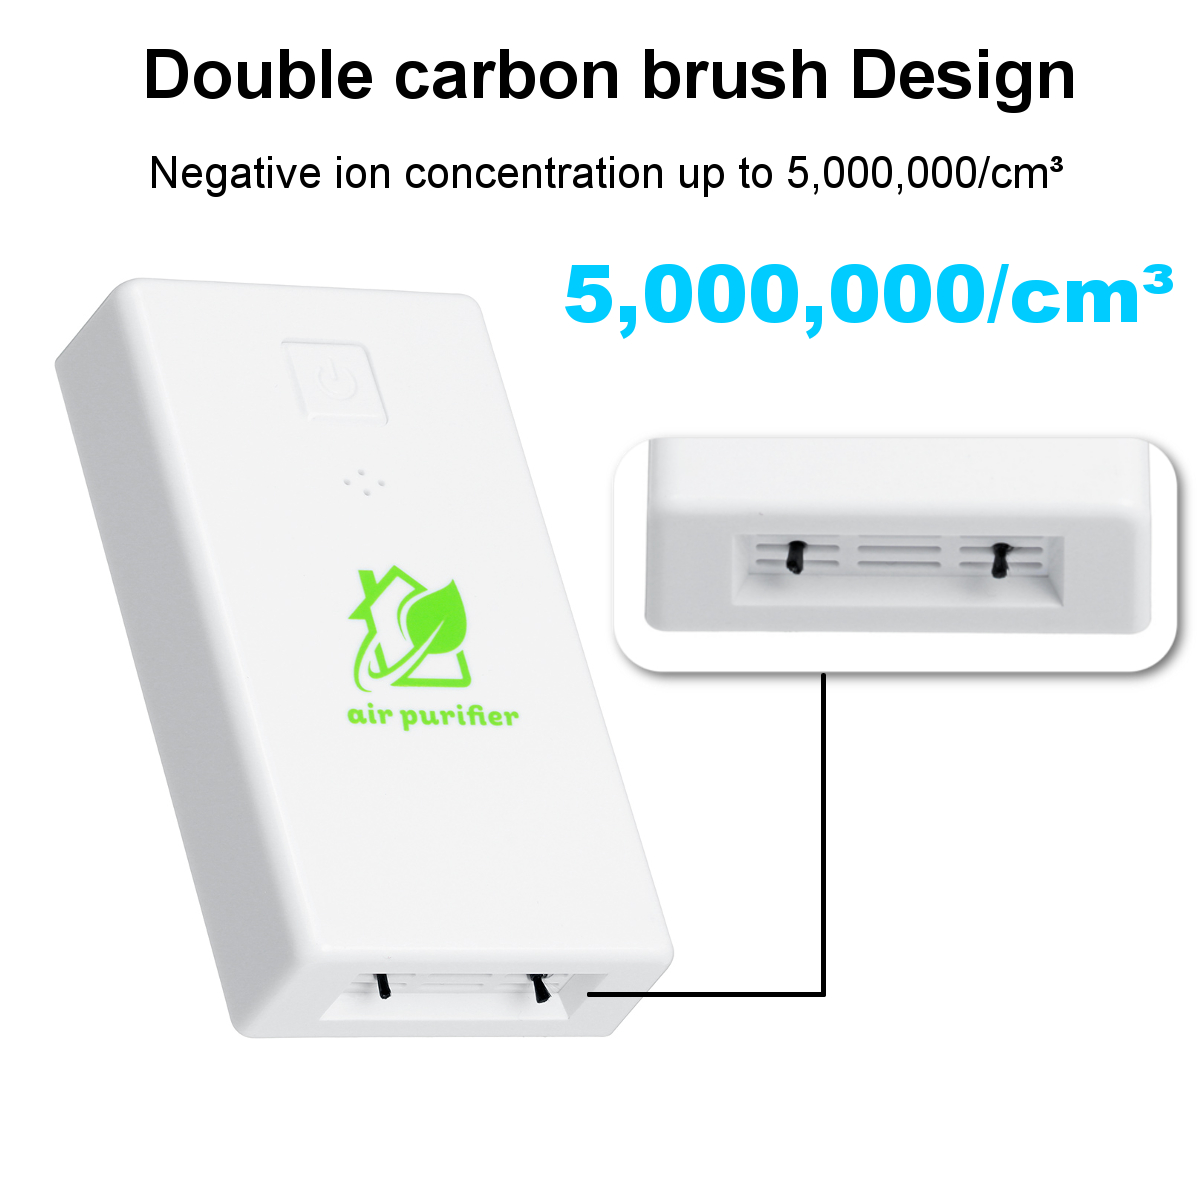 Portable-Plug-in-Air-Purifier-Negative-Ion-Air-Purification-Remove-Formaldehyde-Dust-Eliminate-Odor--1835239-6